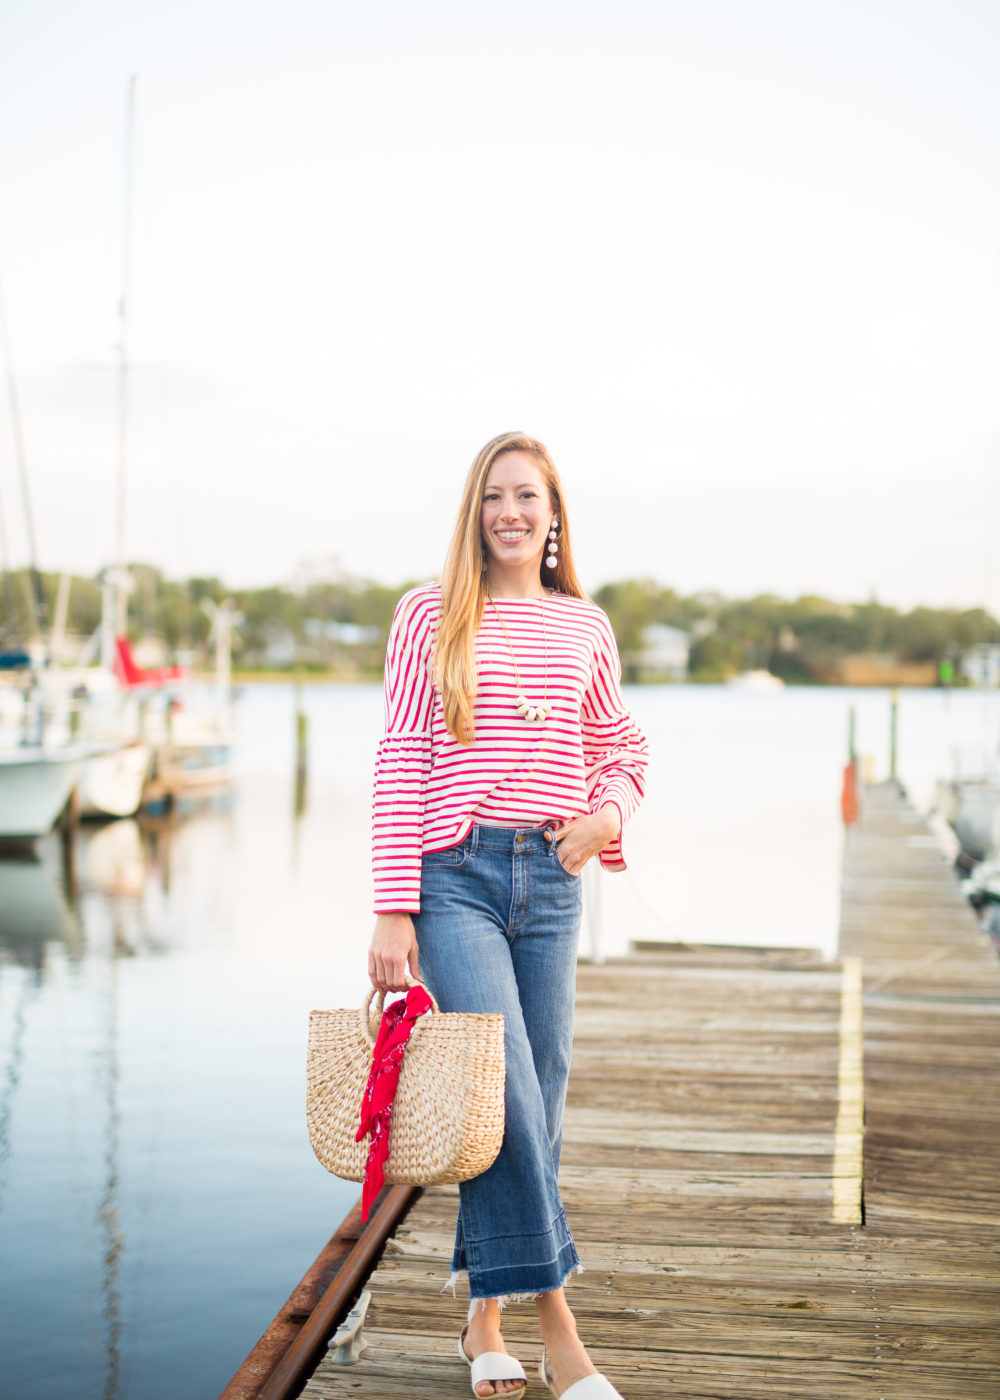 Classic Fall Outfit, Wearing Striped Top, Wide Leg Pants and Straw Bag | Sunshine Style